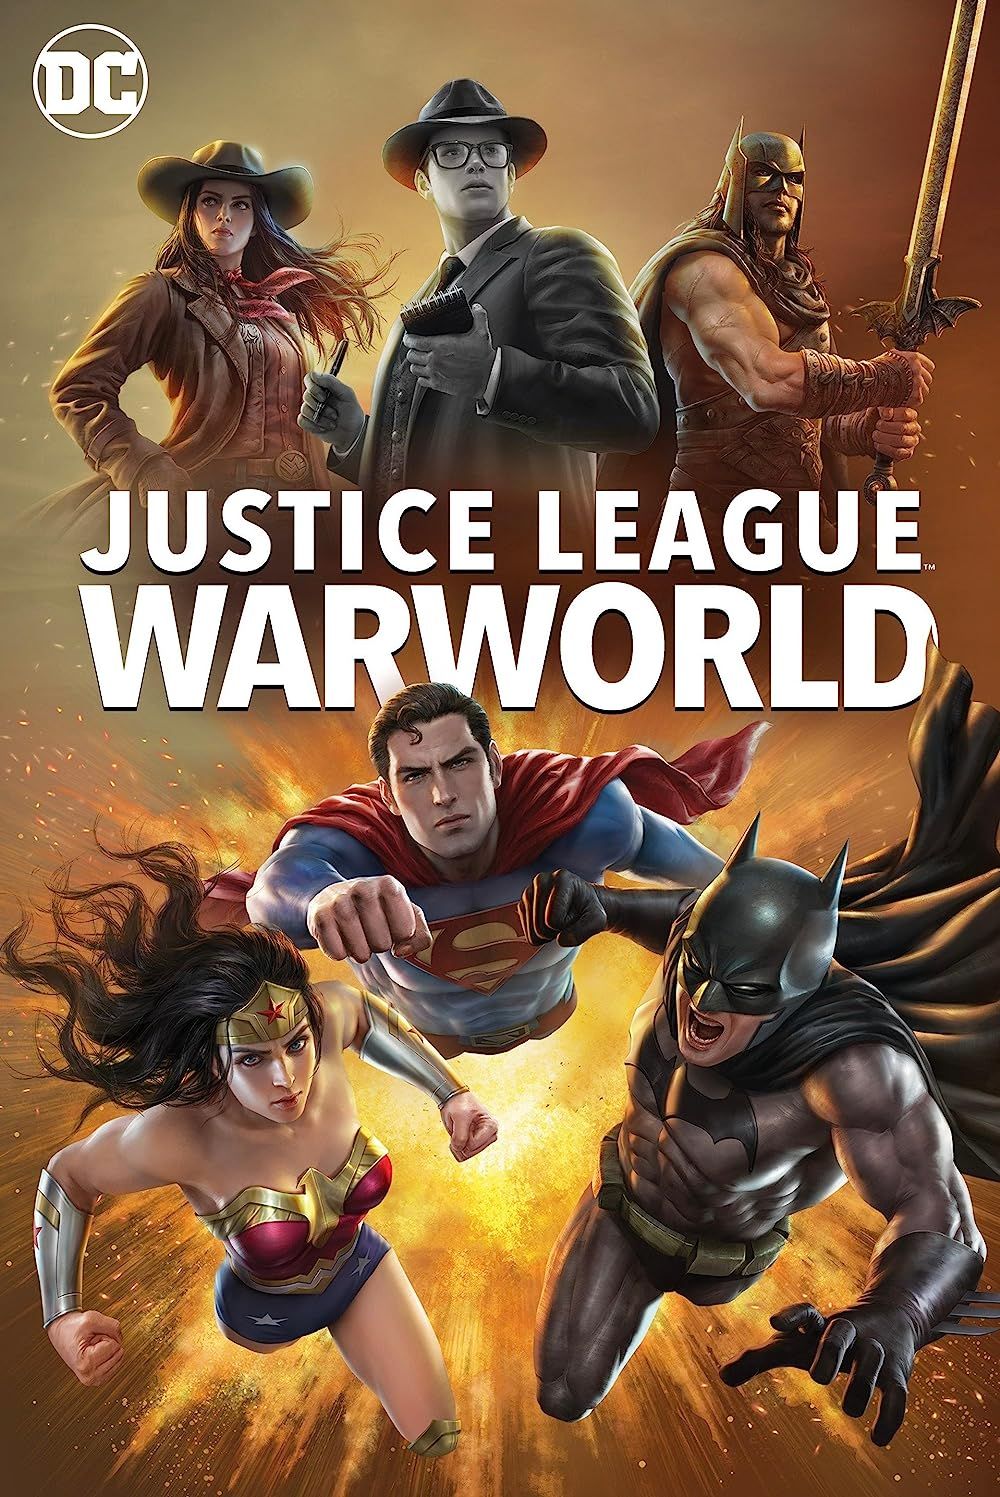 Justice League Warworld (2023) English HDCAM download full movie